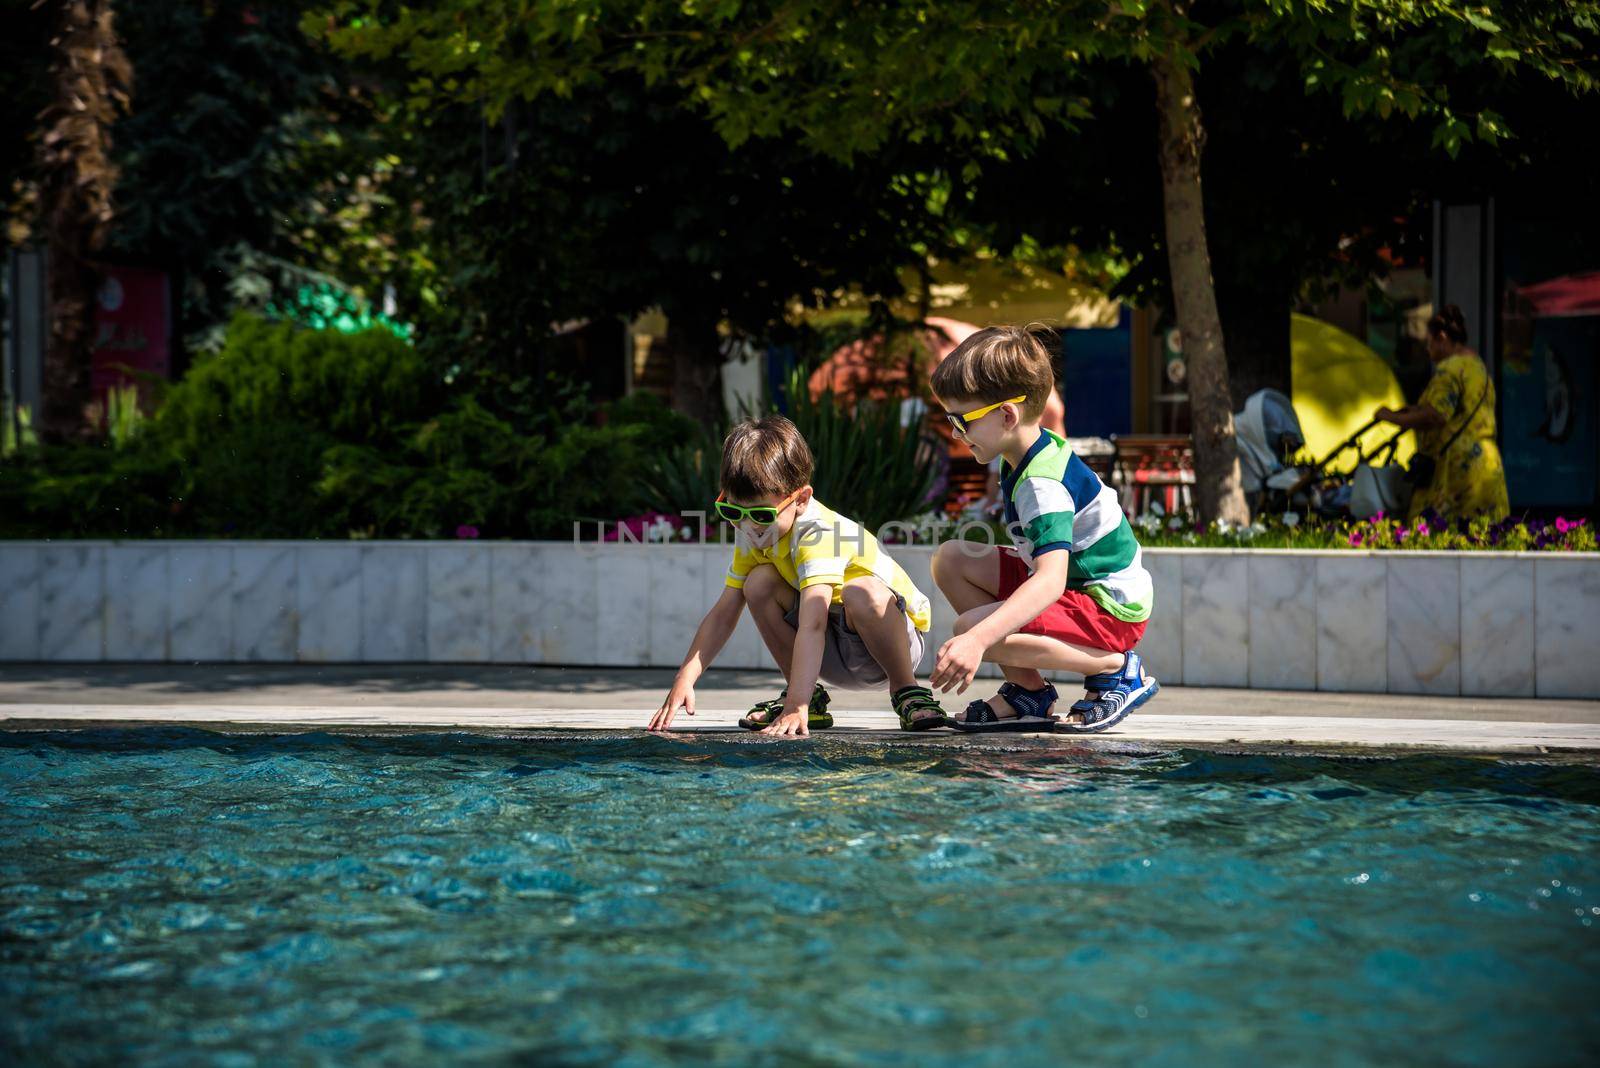 Group of happy children playing outdoors near pool or fountain. Kids having fun in park during summer vacation. Dressed in colorful t-shirts and shorts with sunglasses. Summer holiday concept.